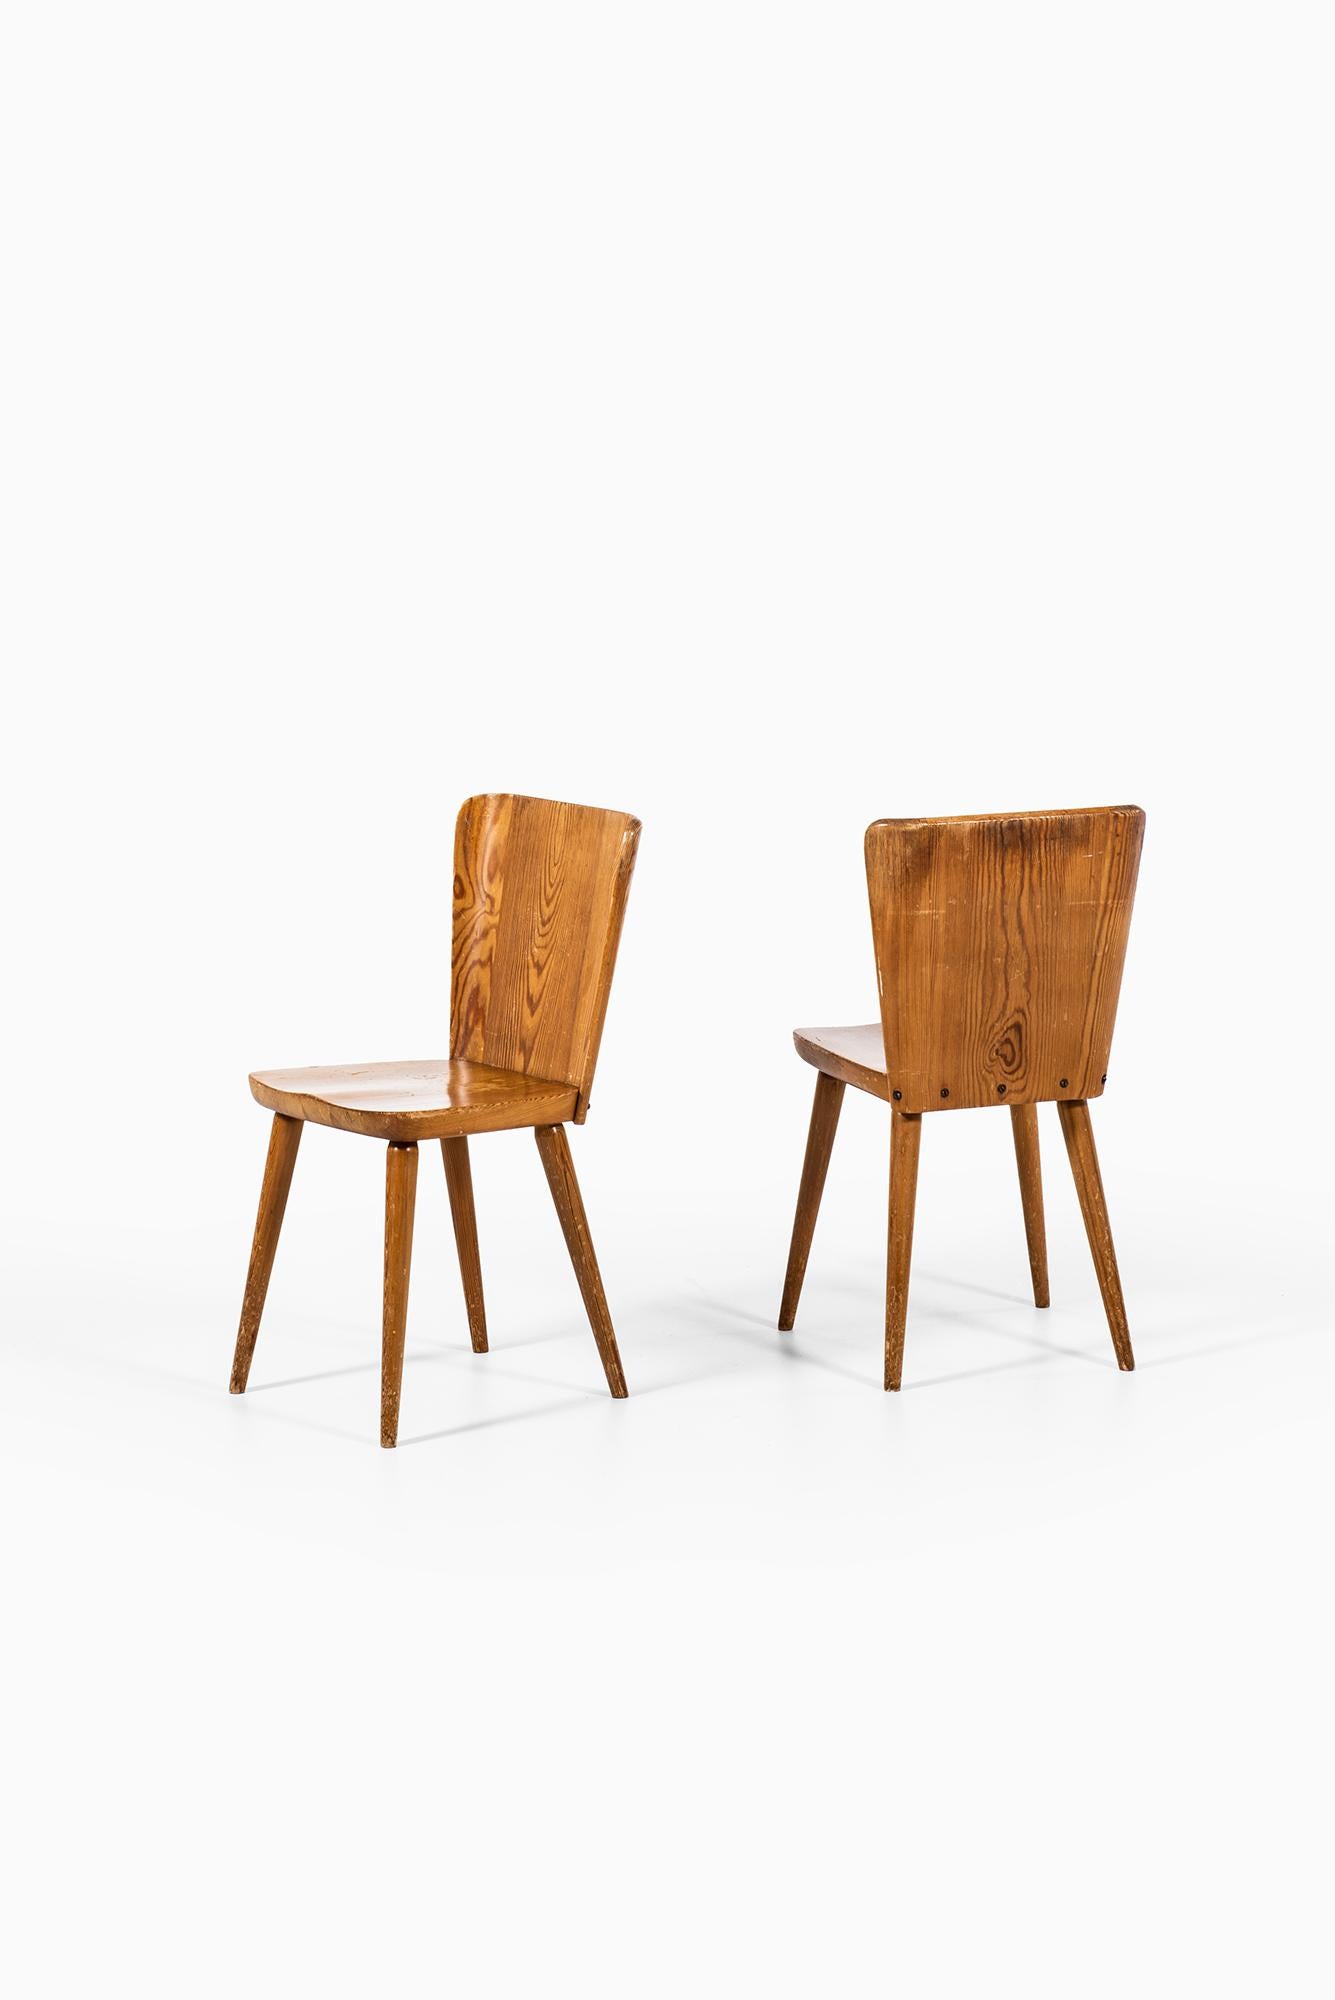 Mid-20th Century Göran Malmvall Dining Chairs in Pine by Svensk Fur in Sweden